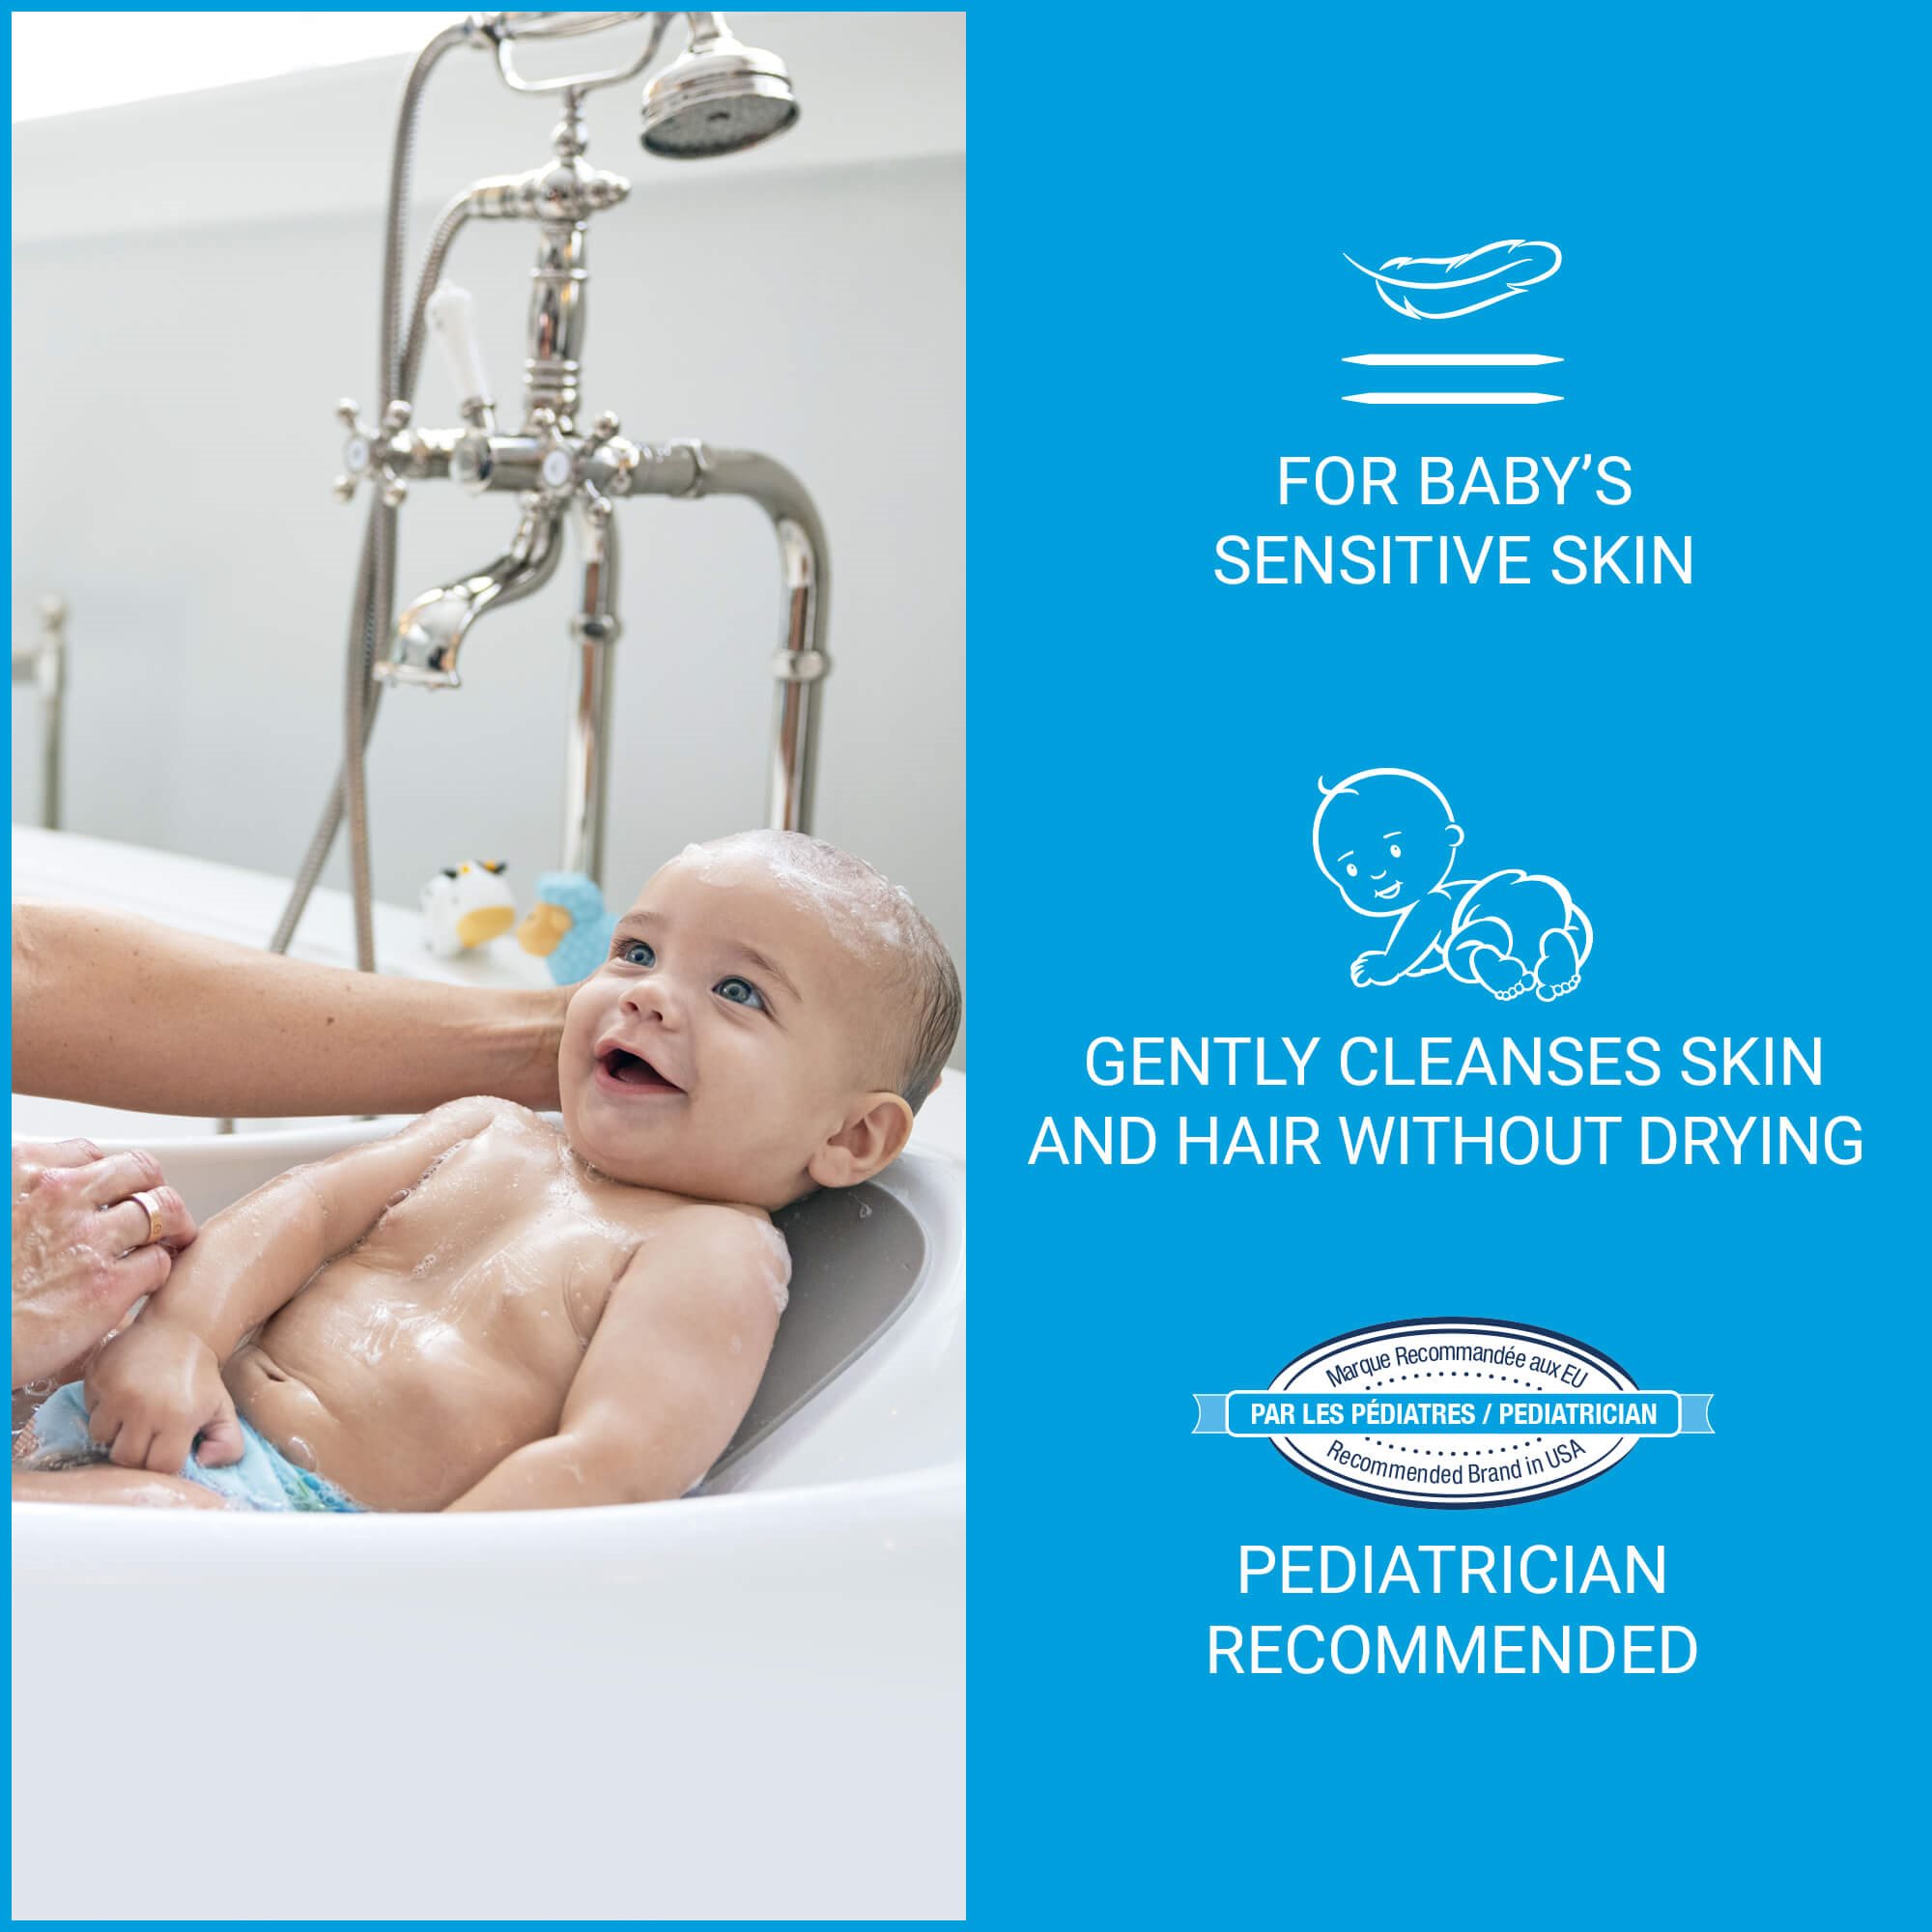 View of a baby inside a bath tub with Eucerin Aquaphor baby wash and shampoo product benefits text on the right against a blue background.